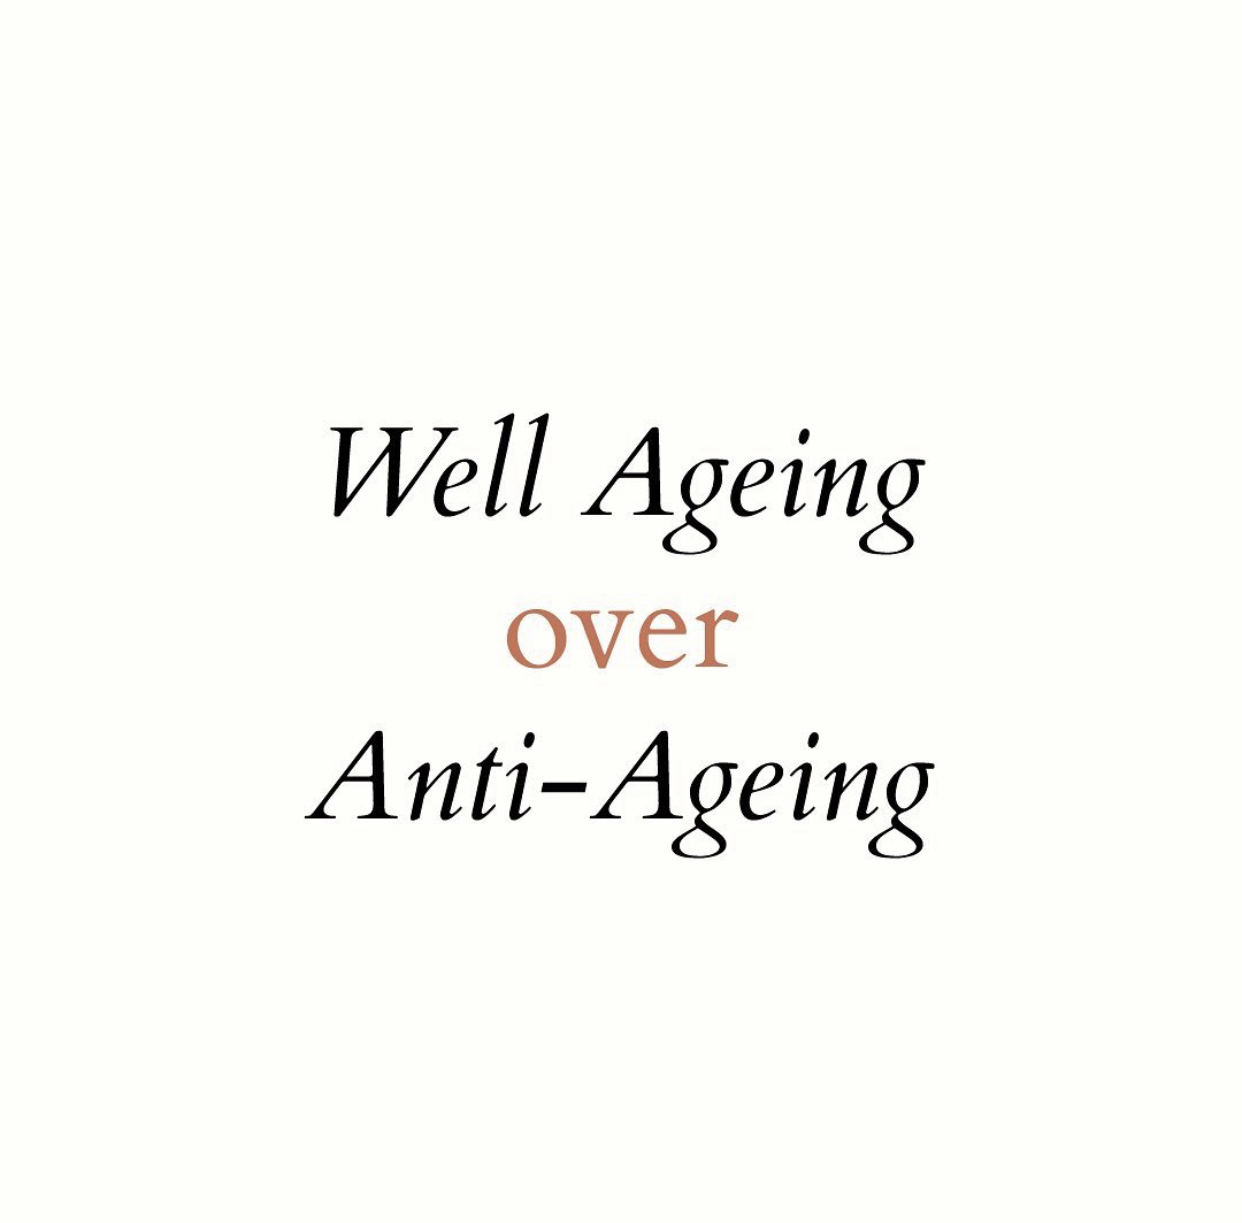 Well – Aging over Anti – ageing